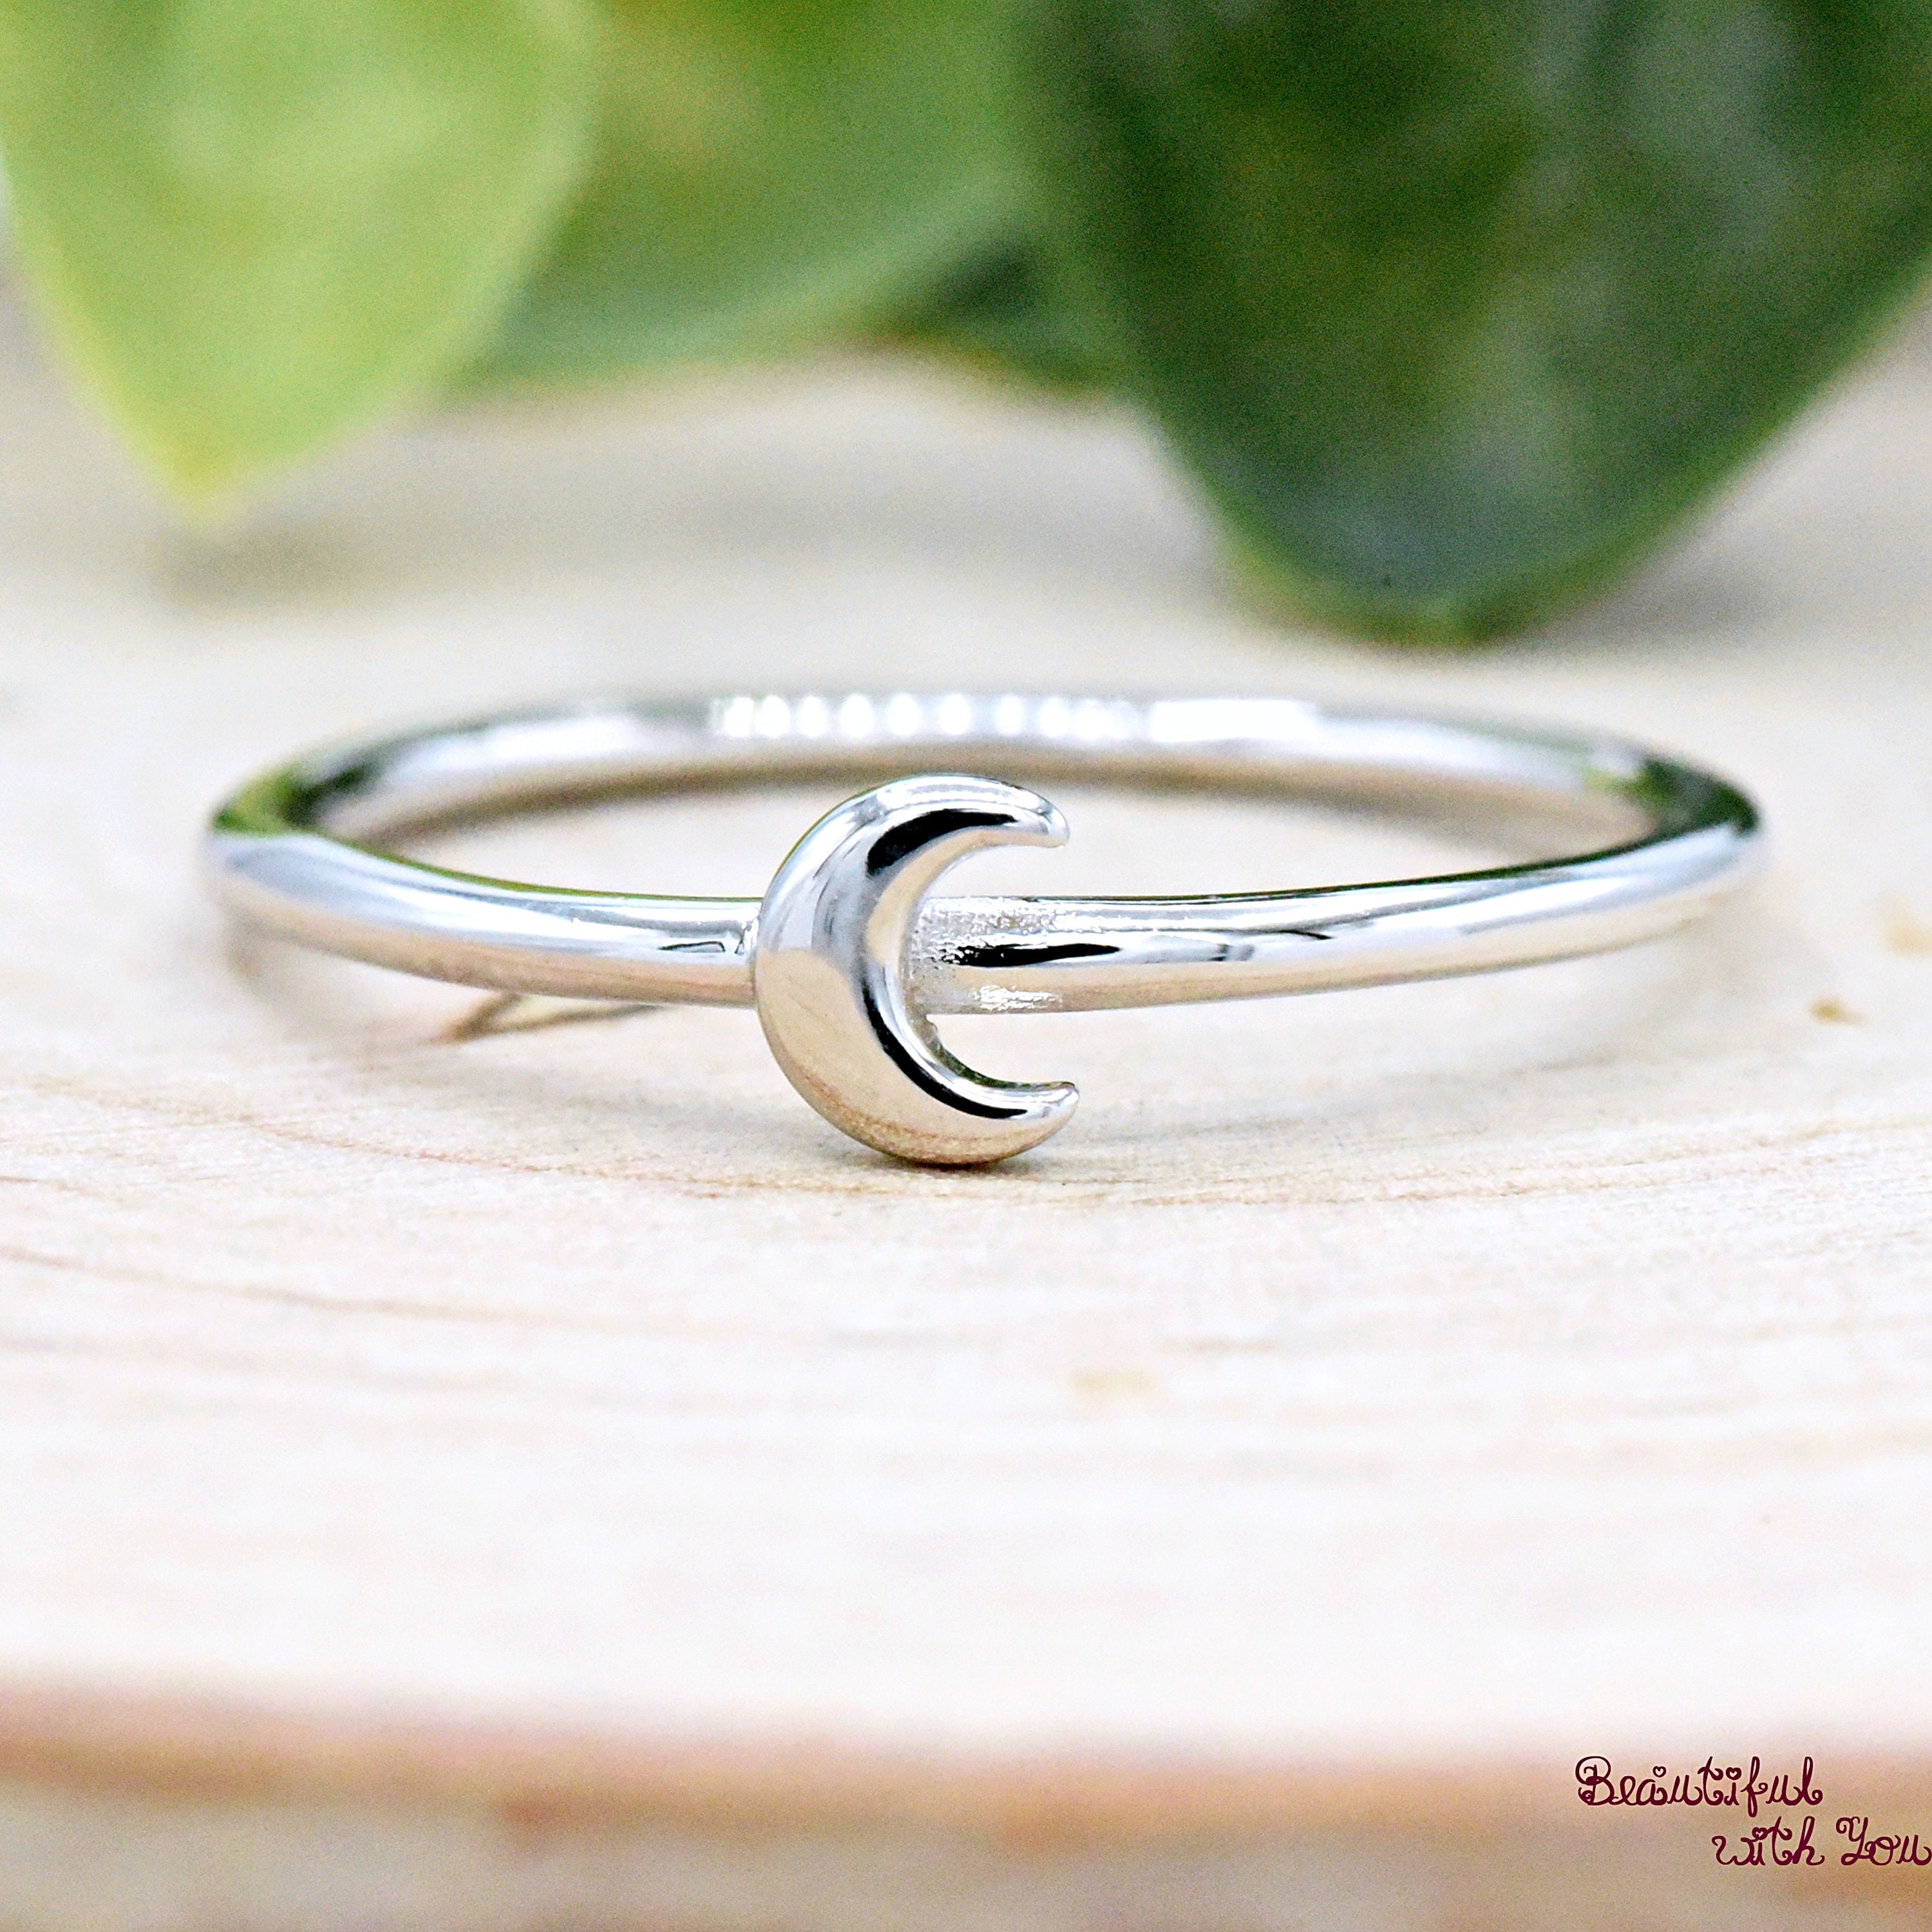 Beautiful High Polish Double Crescent Moon Belt Ring .925 Sterling Silver Band Jewelry Female Size 10, Women's